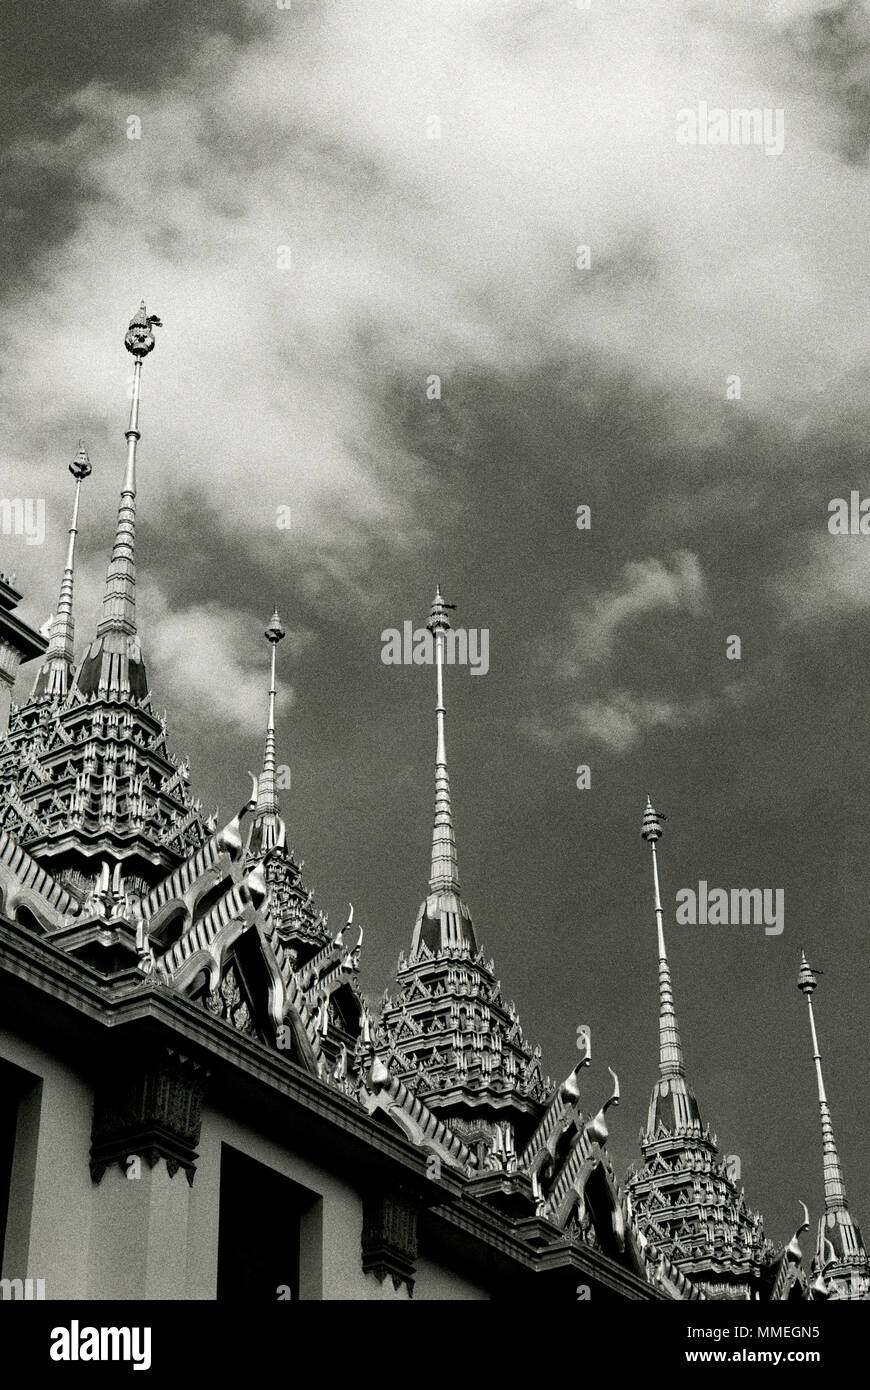 Spires of the Buddhist temple Loha Prasat Metal Castle of Wat Ratchanadda in Bangkok in Thailand in Southeast Asia Far East. Architecture Travel B&W Stock Photo